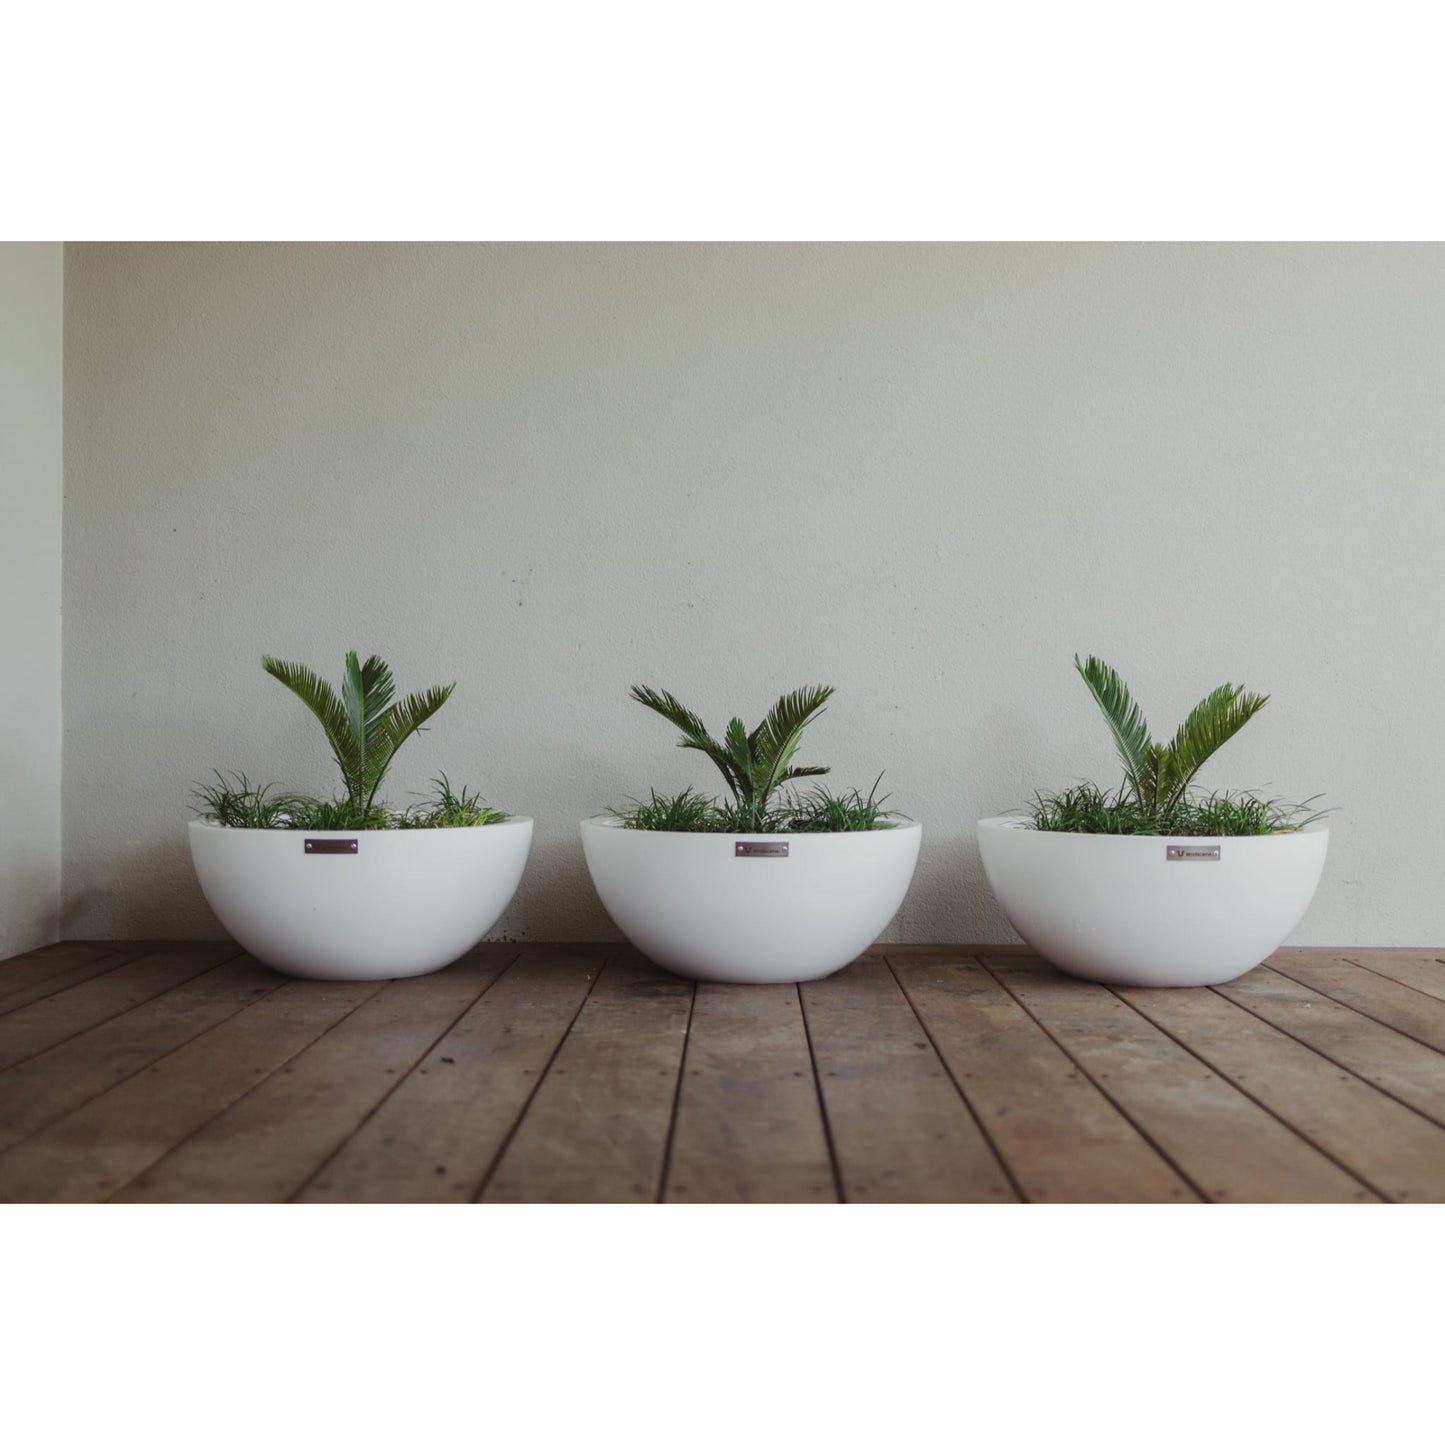 White bowl planter pots on a balcony planter with small cycads.